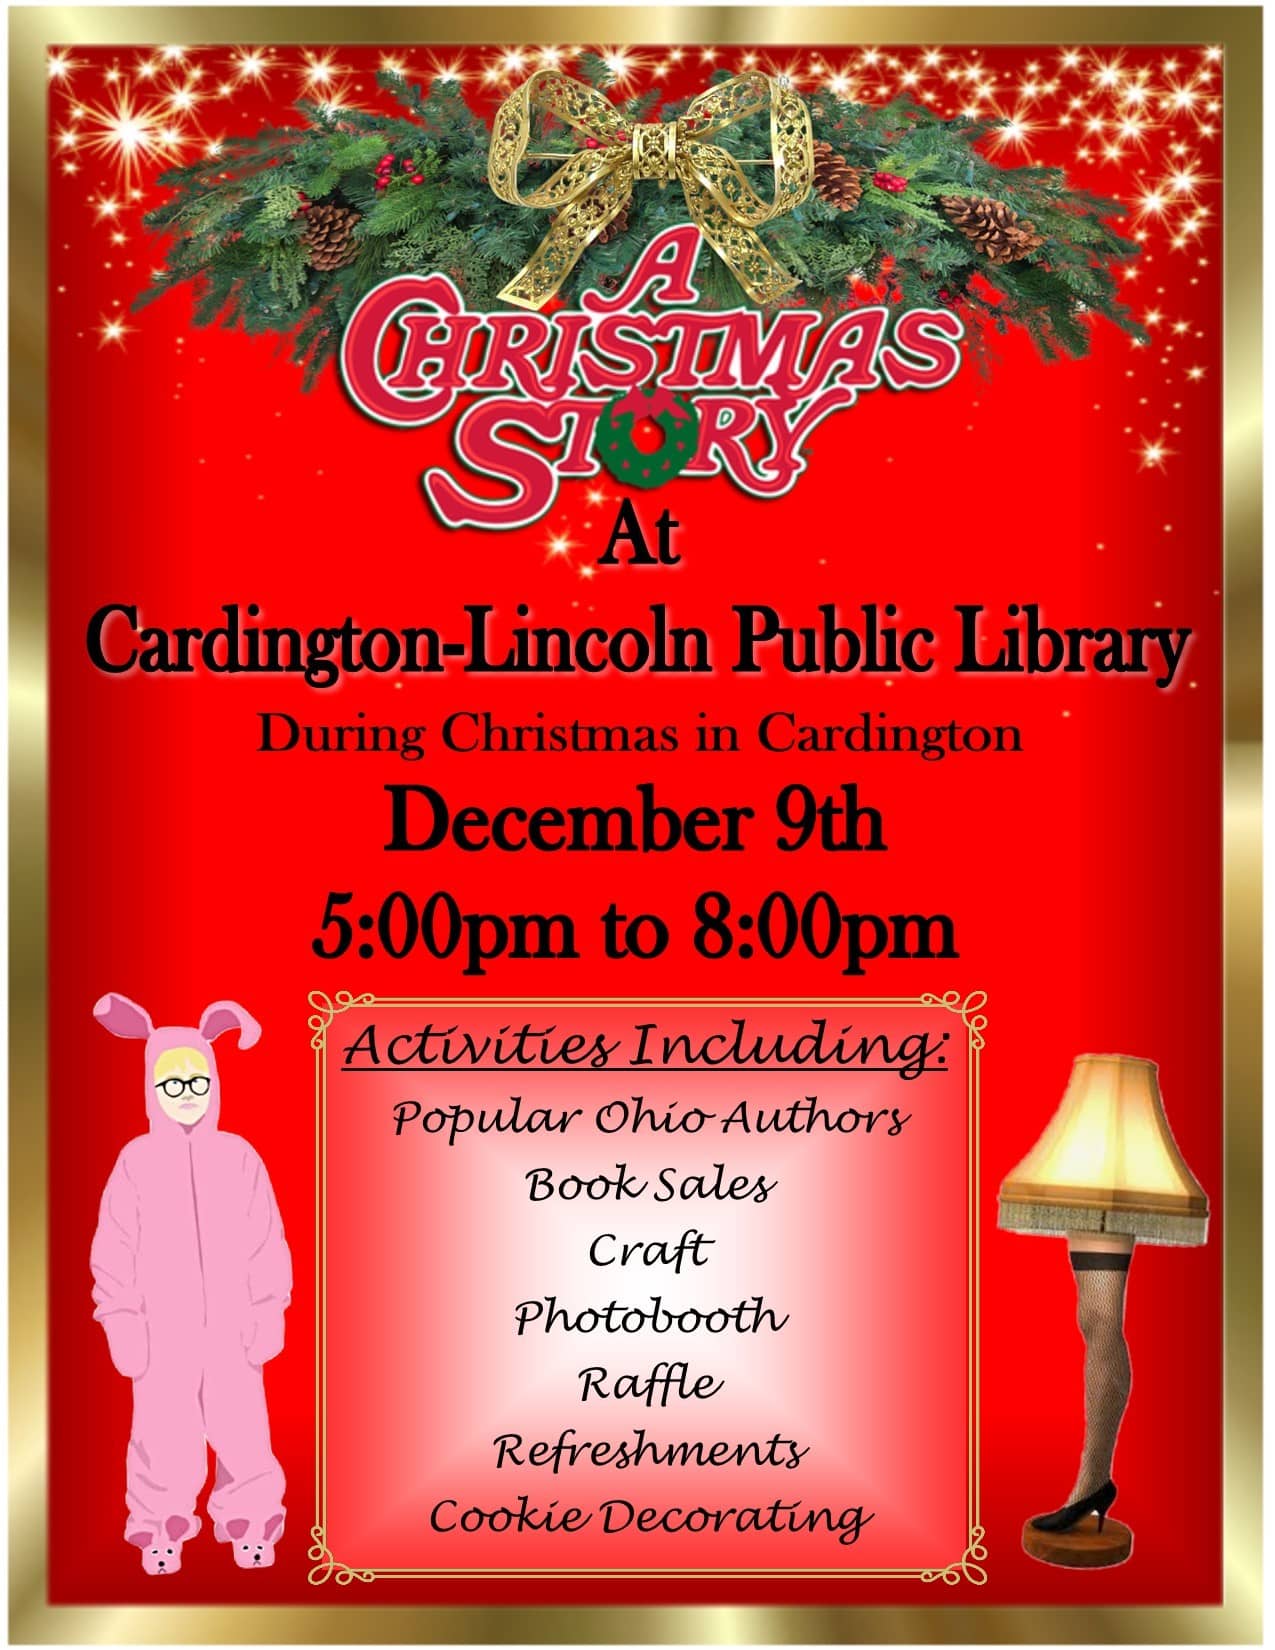 A Christmas Story at Cardington Public Library.  December 9th 5- 8 PM. Activities include popular Ohio authors, book sales, craft, photo booth, raffle, refreshments, and cookie decorating